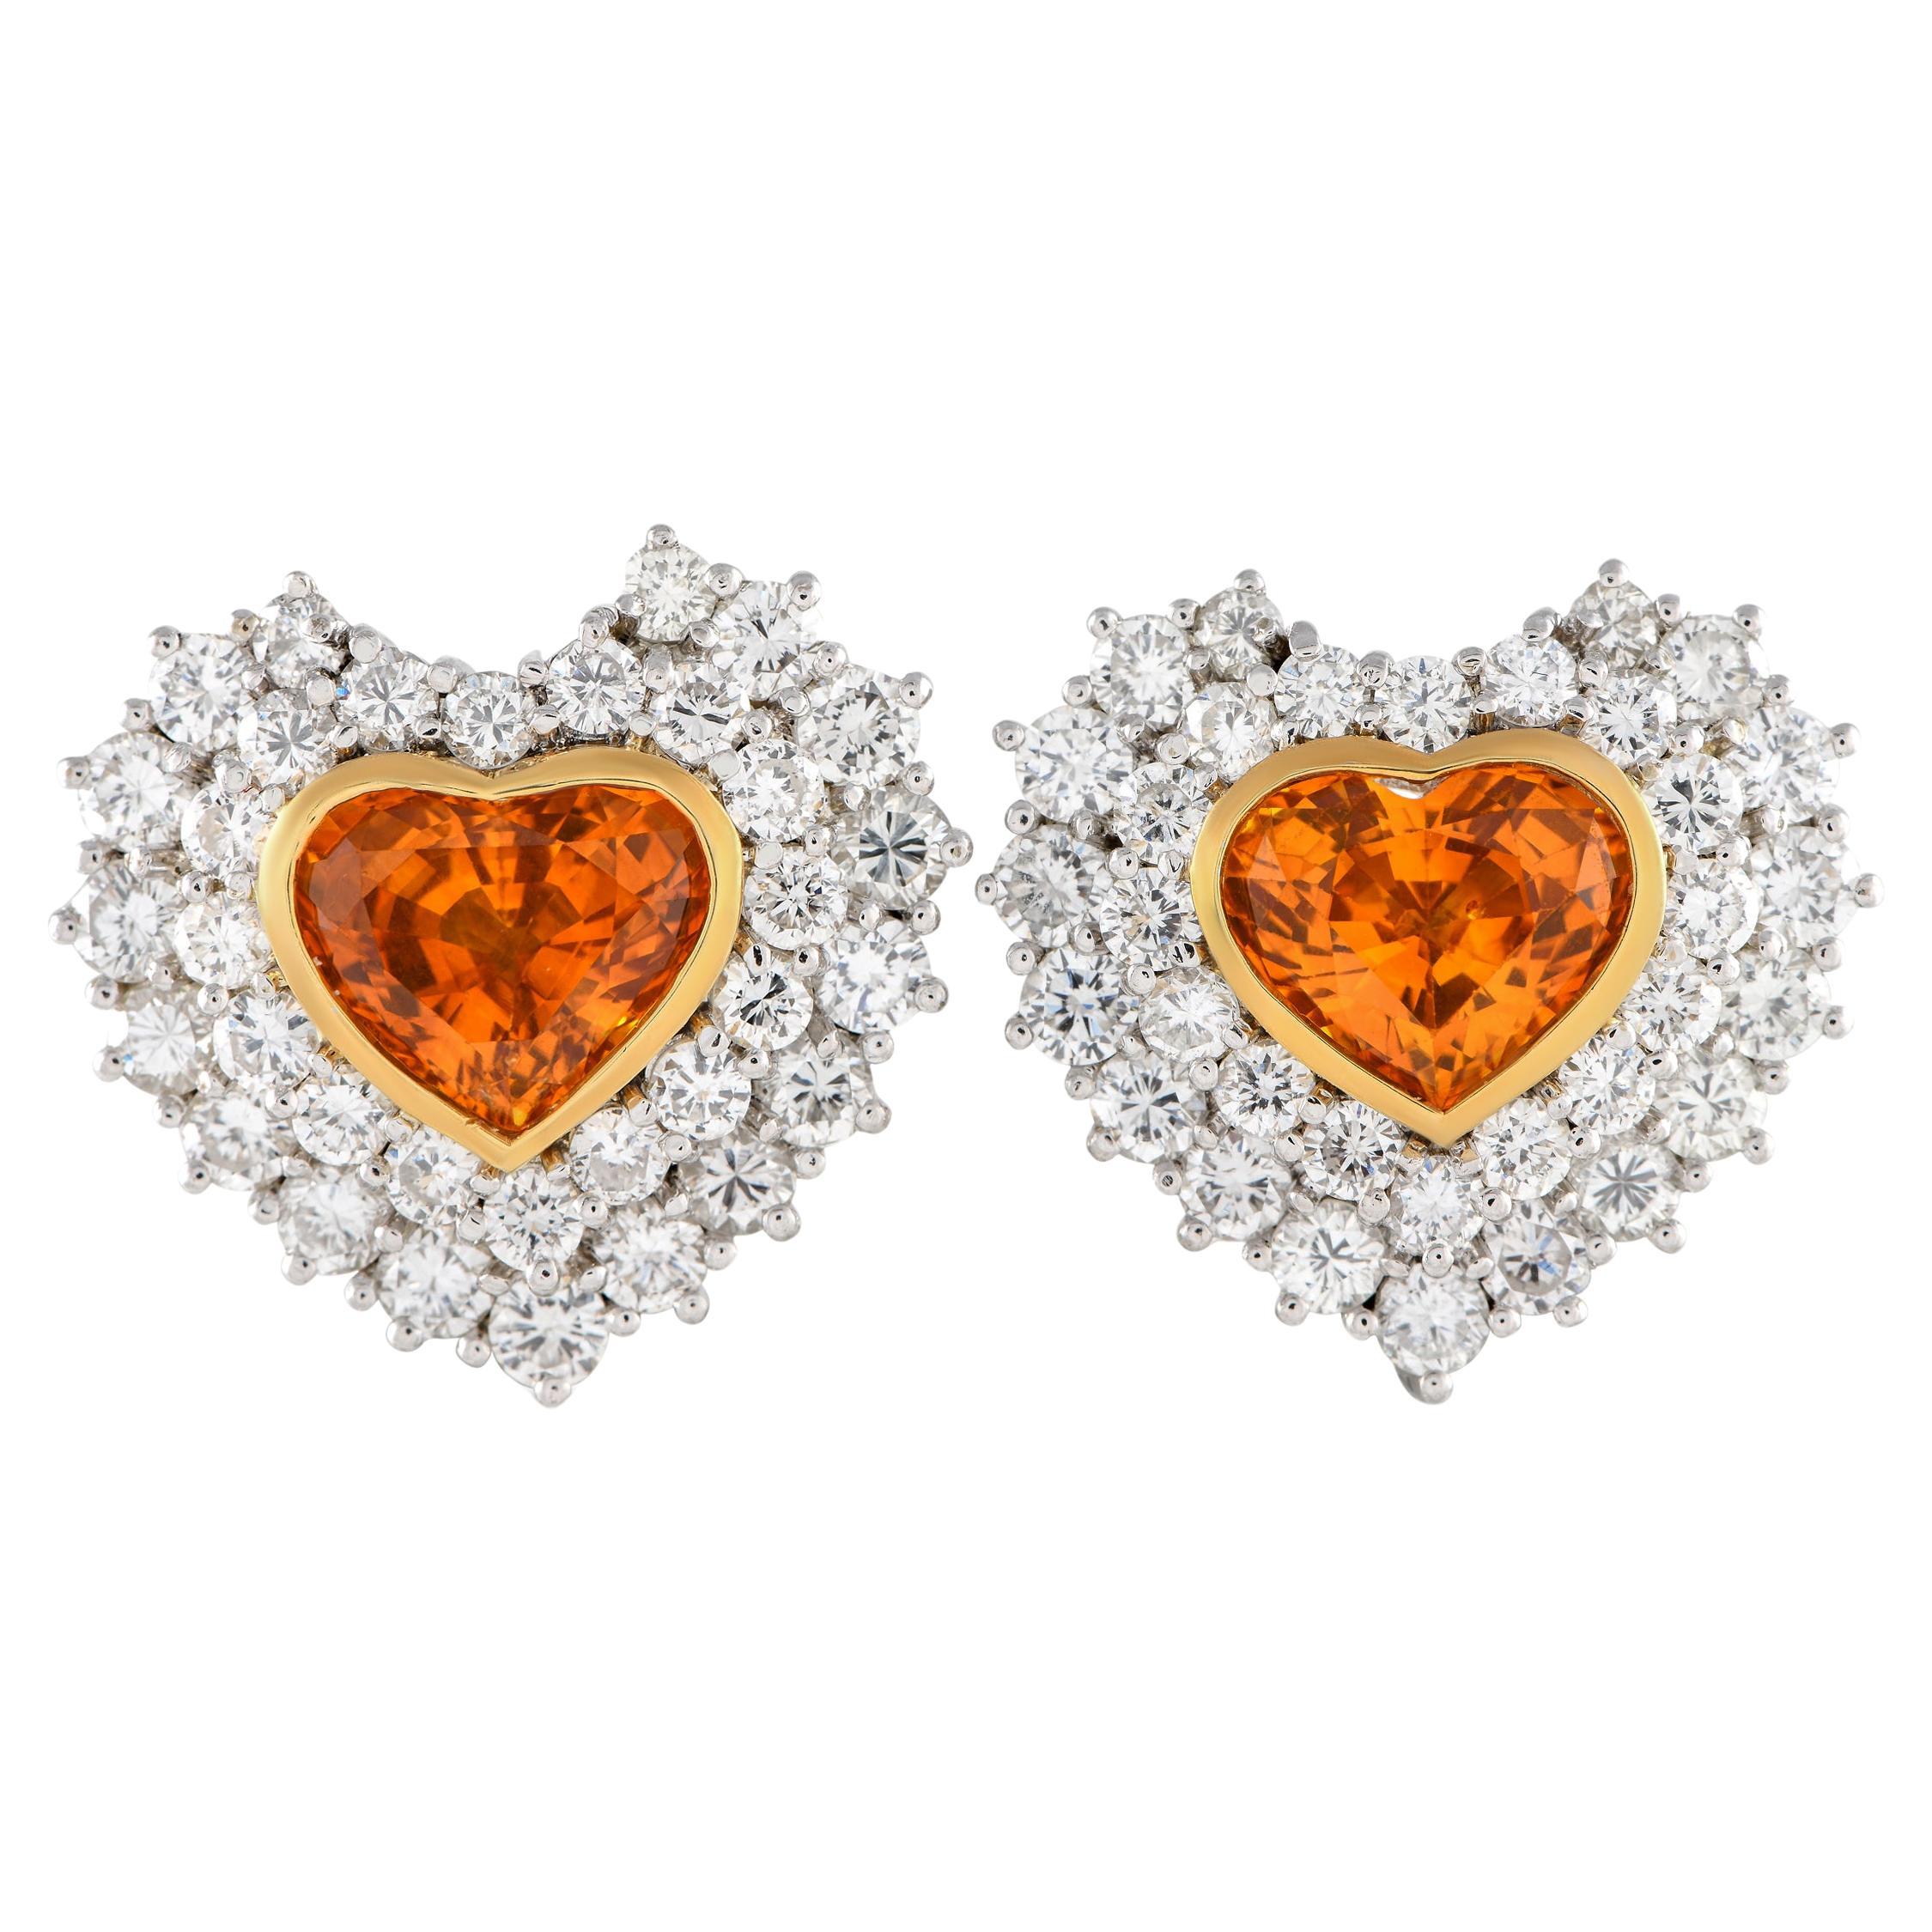 18K White and Yellow Gold 3.62ct Diamond and Sapphire Heart Earrings For Sale